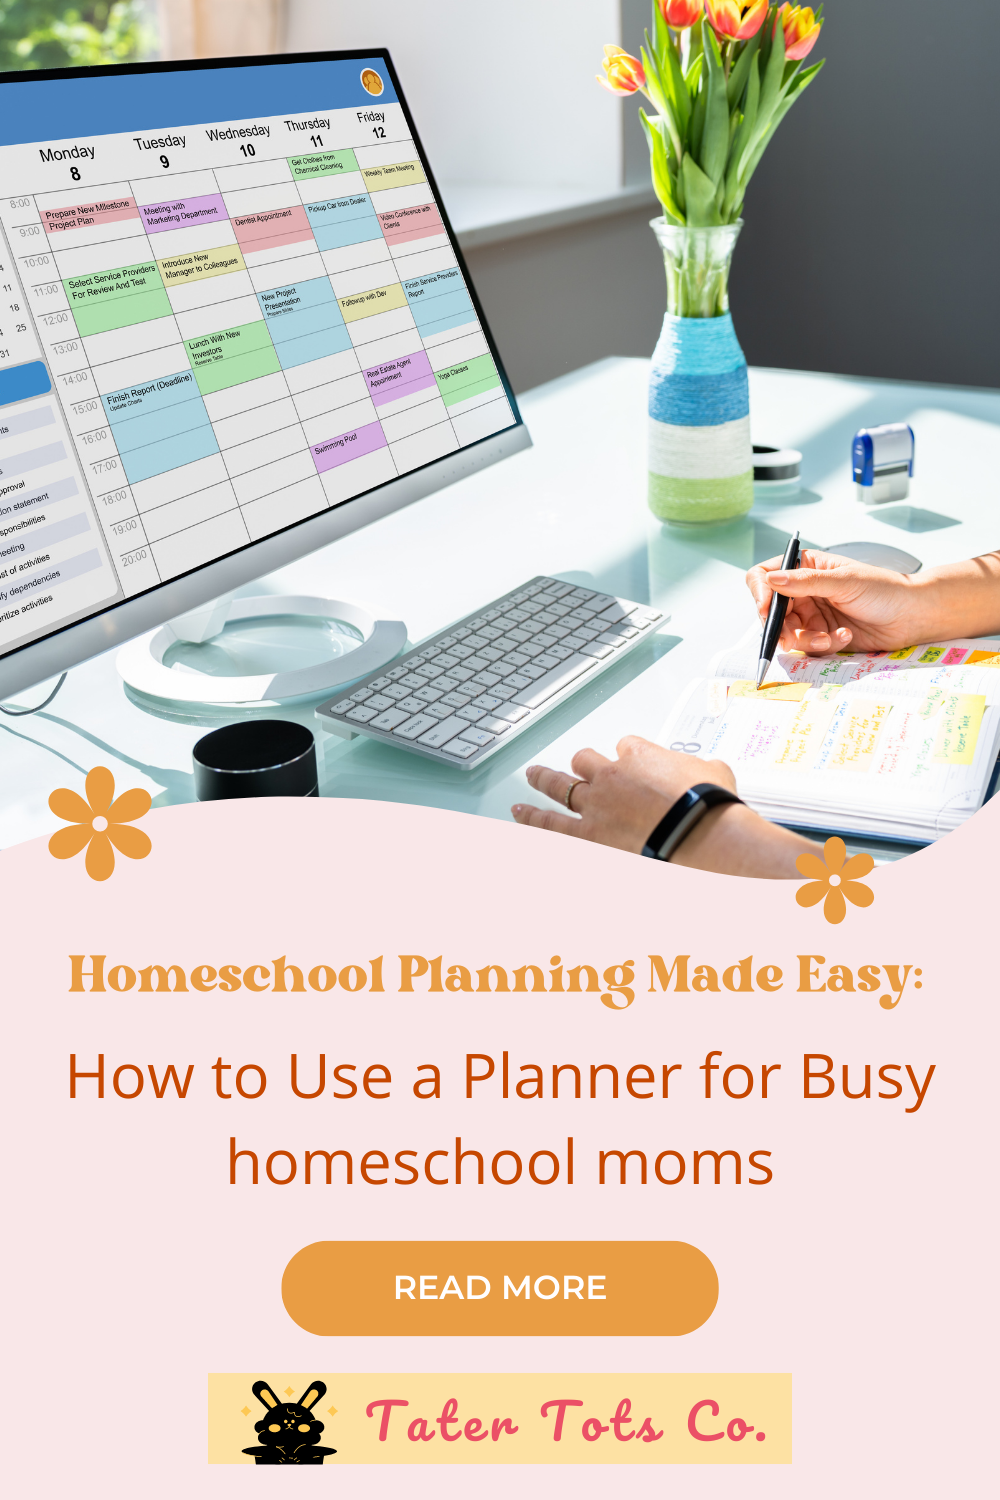 Homeschool Planning Made Easy How to Use a Planner for Busy homeschool moms 003